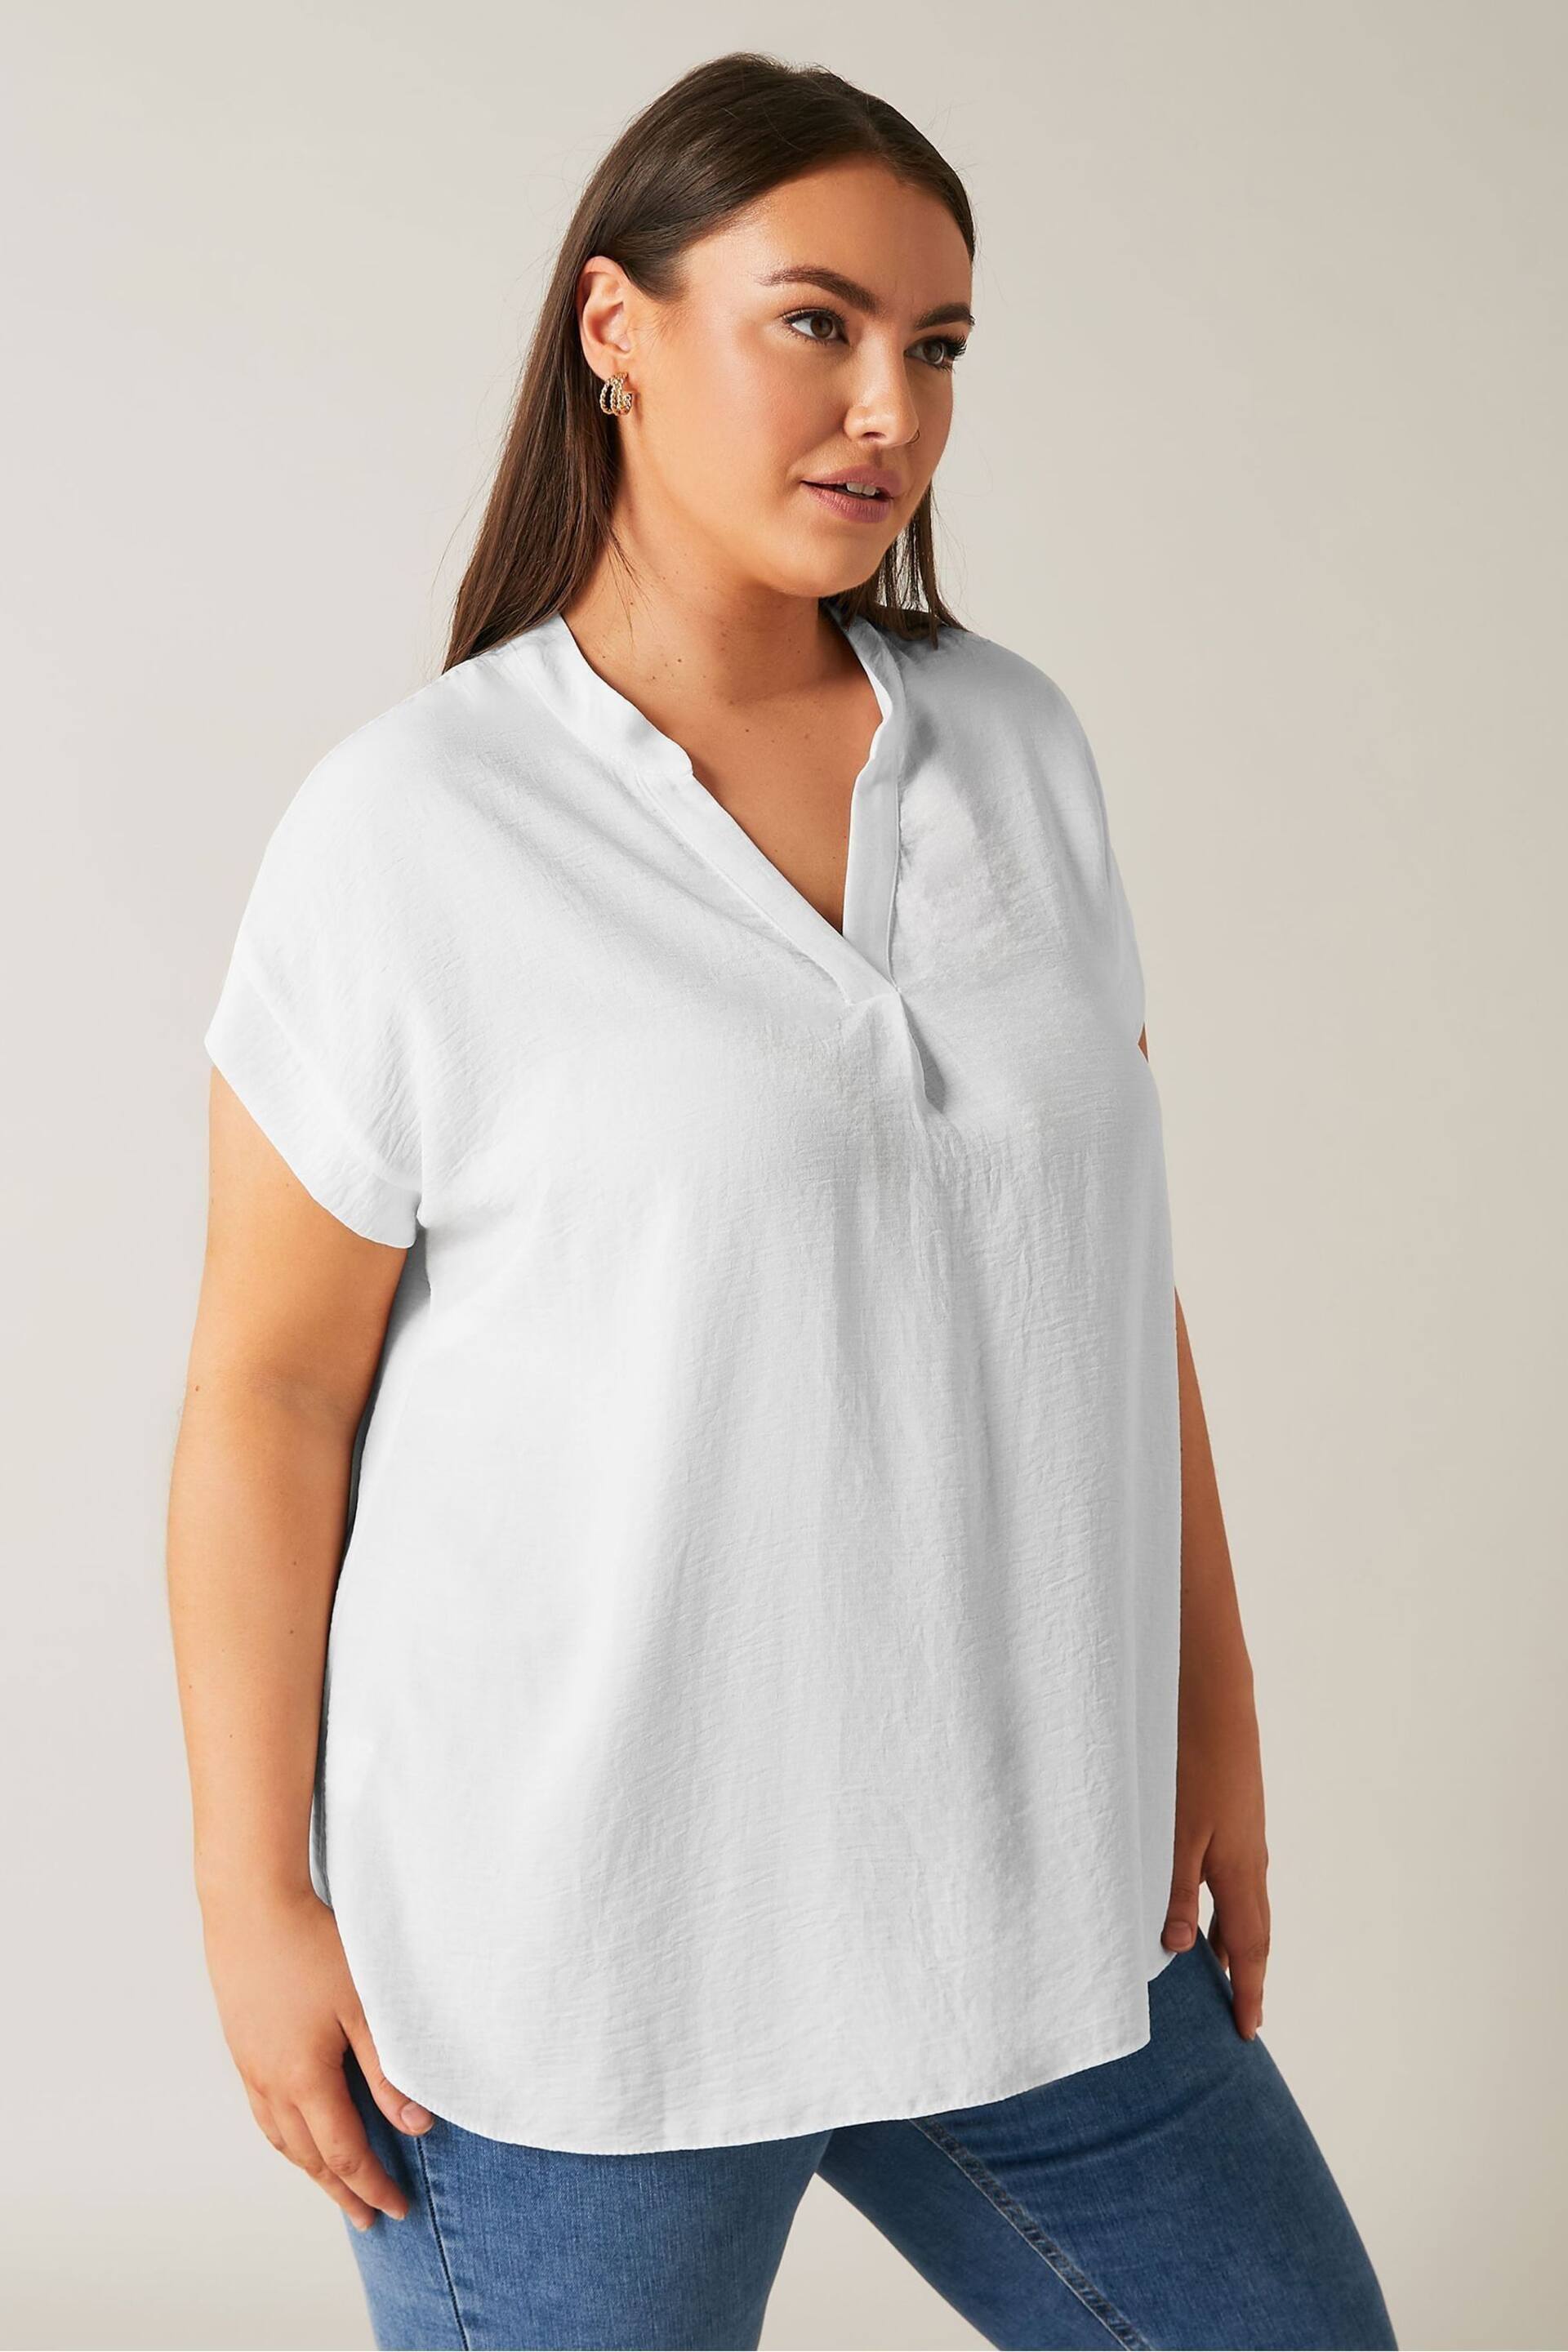 EVANS Curve Ivory Red Utility Blouse - Image 1 of 5